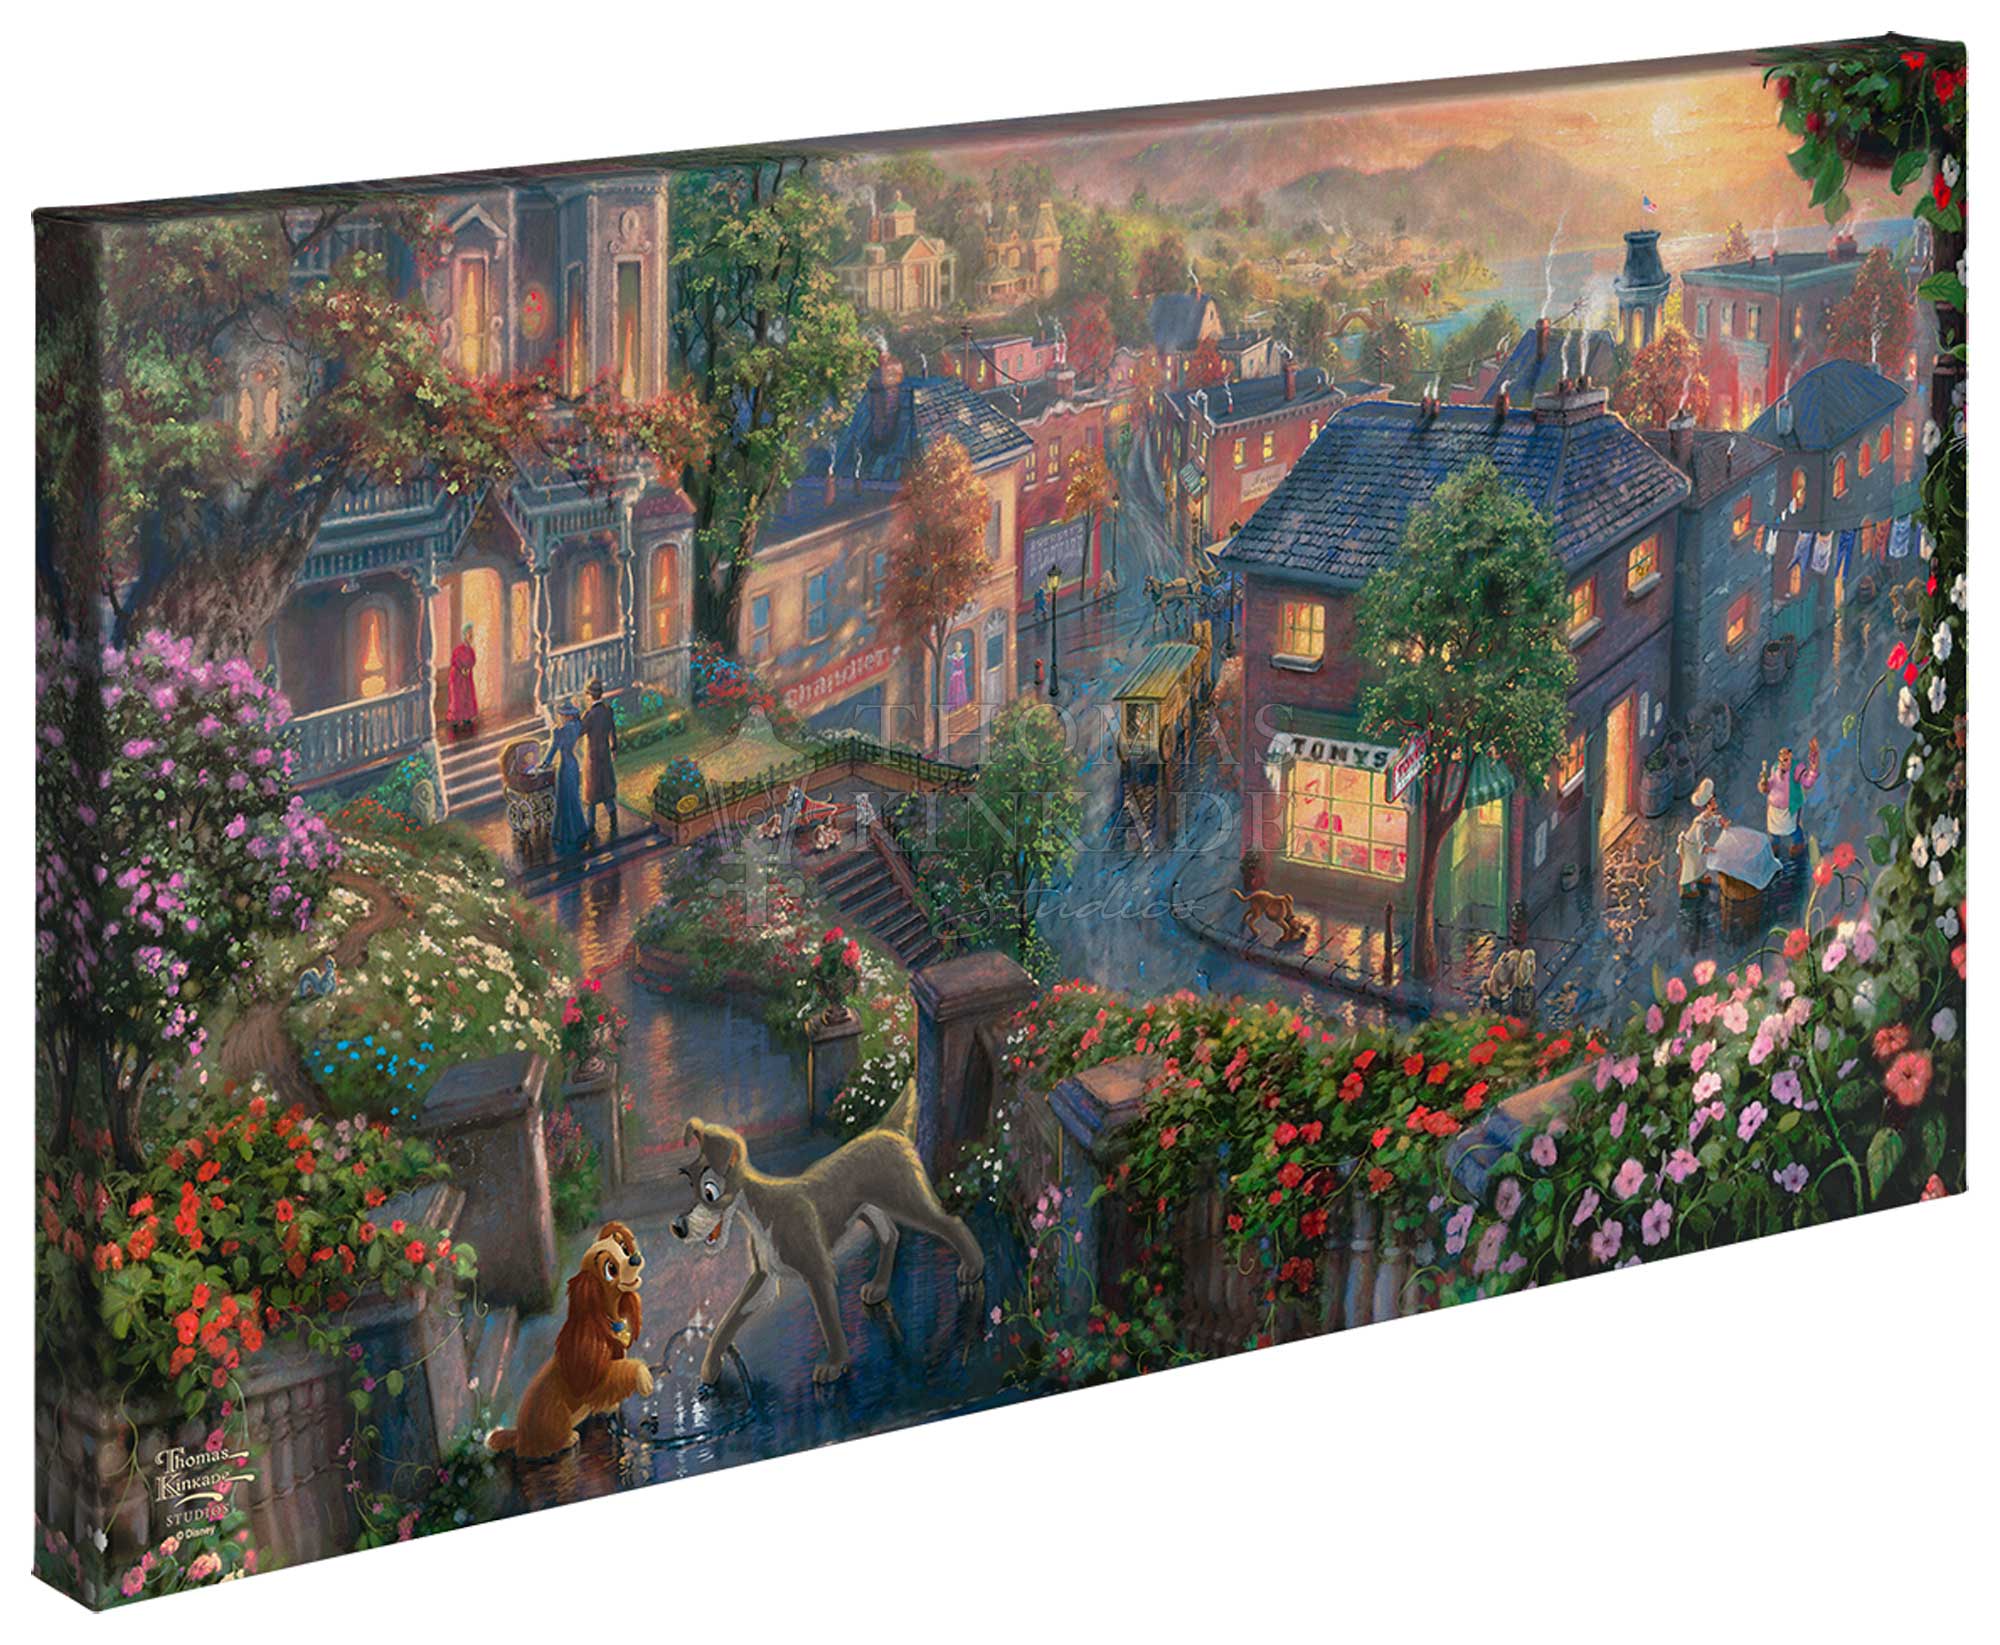 The blossoming relationship between Lady, an innocent and beautiful cocker spaniel, and Tramp, a roguish mutt from "the wrong side of the tracks. The lights glow as the sun sets on this beautiful Victorian City. 16x31